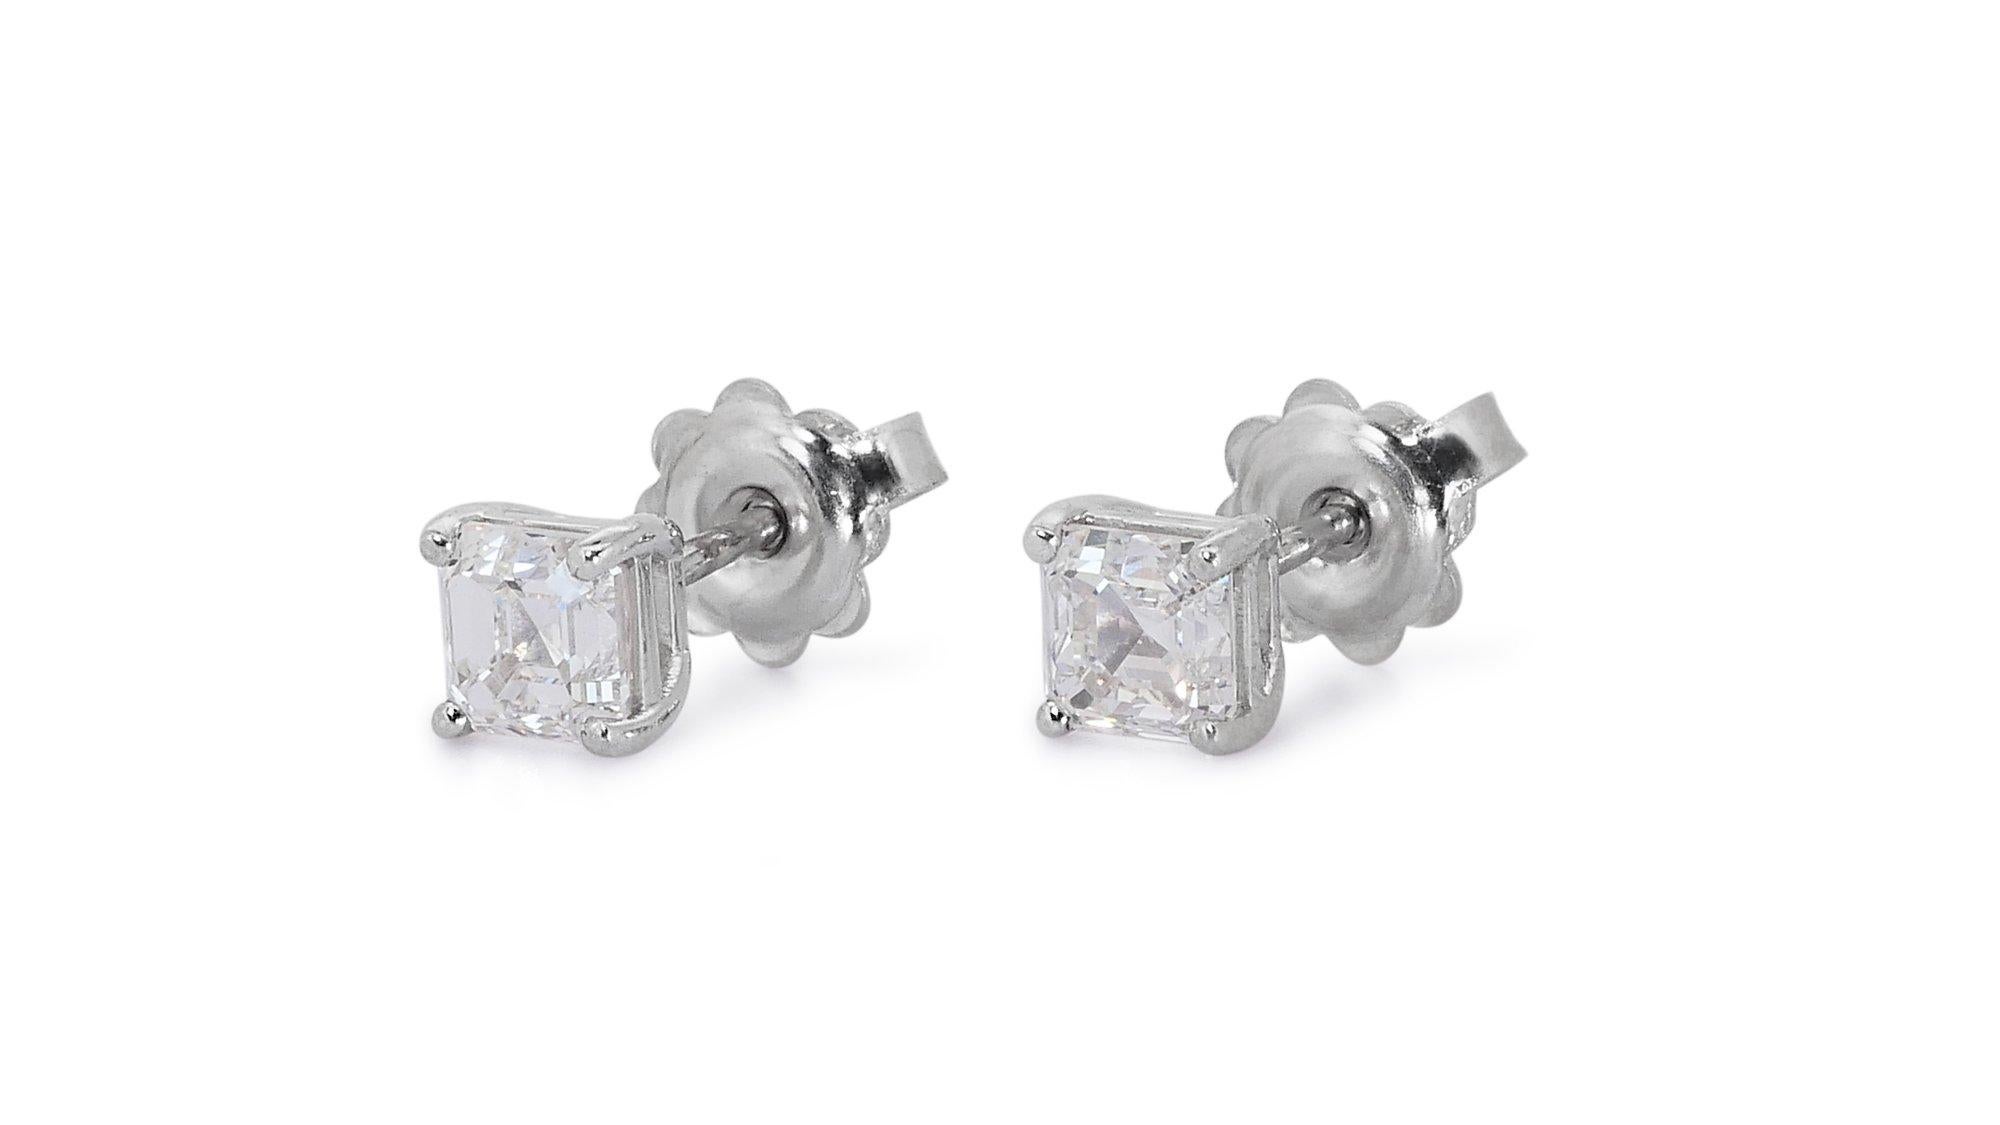 Timeless 2.05ct Diamond Stud Earrings in 18k White Gold - GIA Certified

Unveil the pure radiance of these sleek diamond stud earrings, exquisitely set in 18k white gold. Each earring features a square-cut diamond, together weighing 2.05-carat.